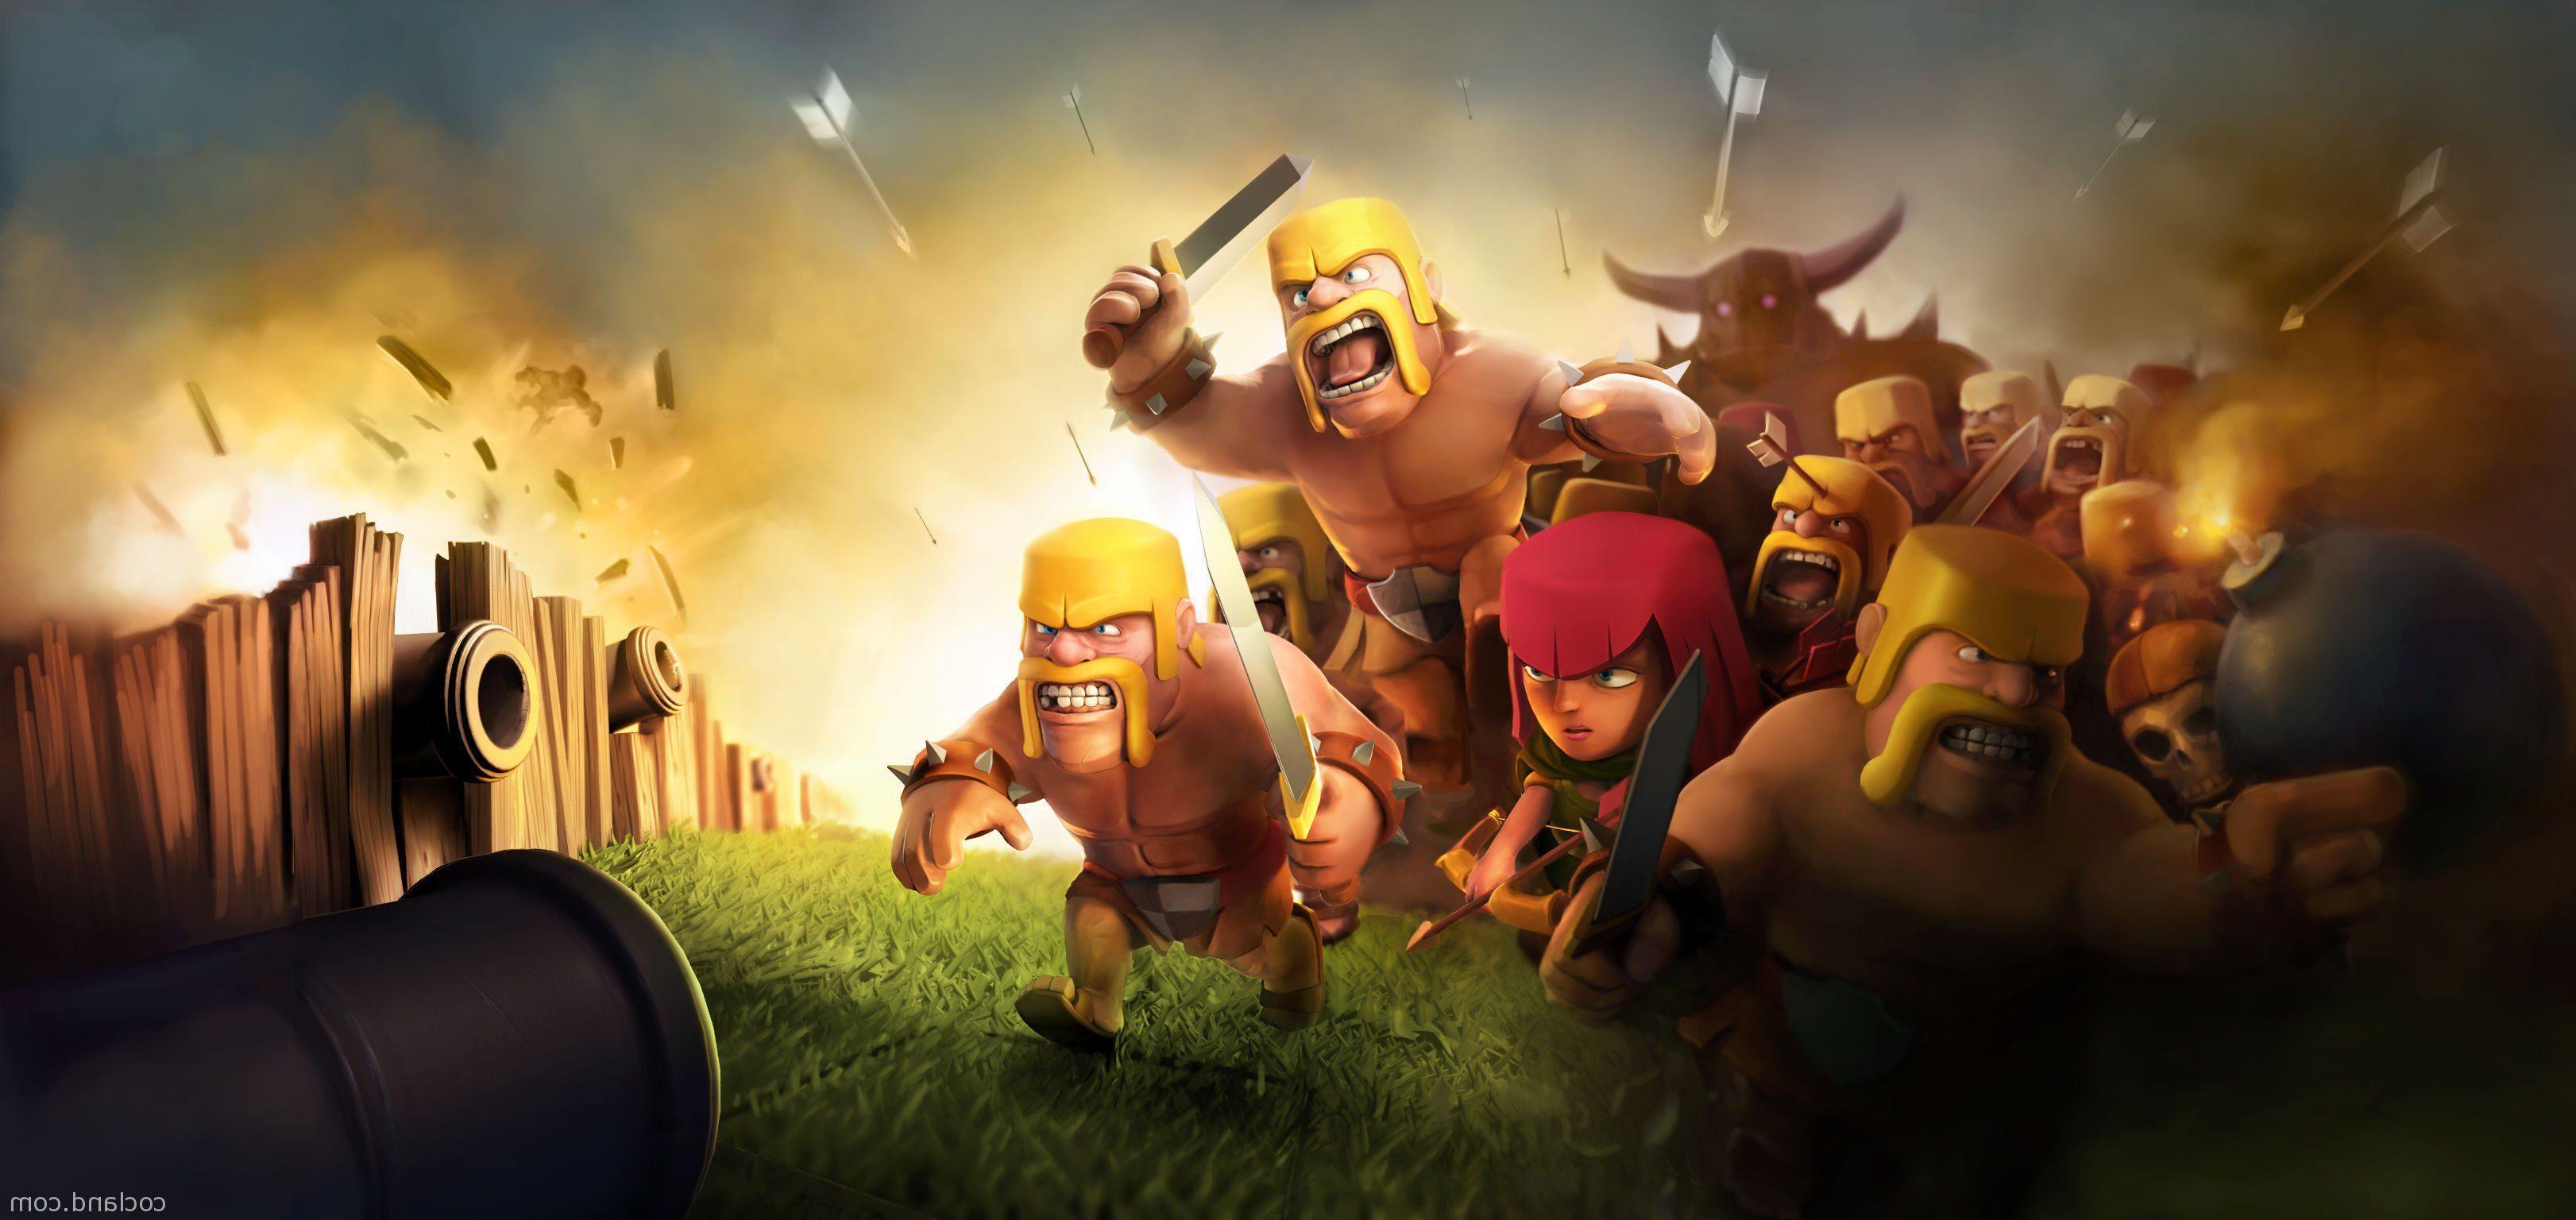 High Quality Clash of Clans Wallpaper. Full HD Picture